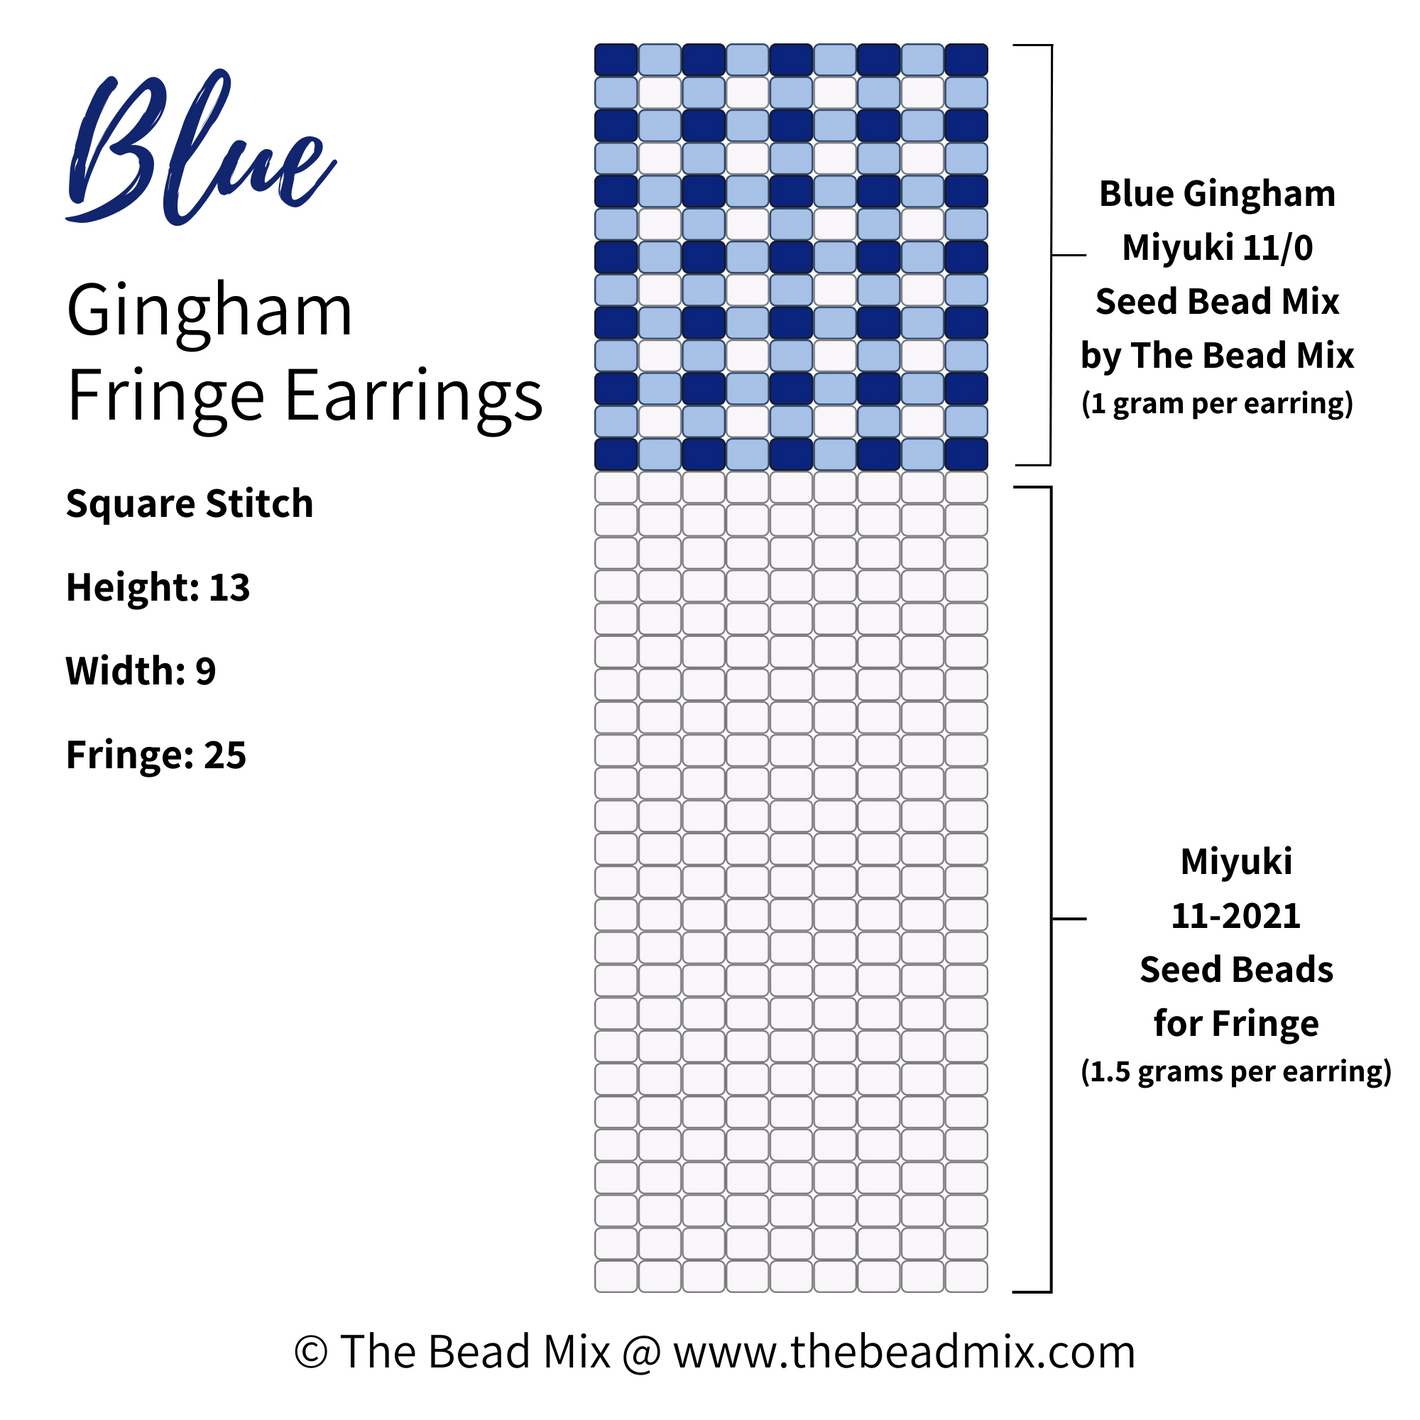 Free square stitch beading pattern to make blue gingham pattern fringe earrings by The Bead Mix